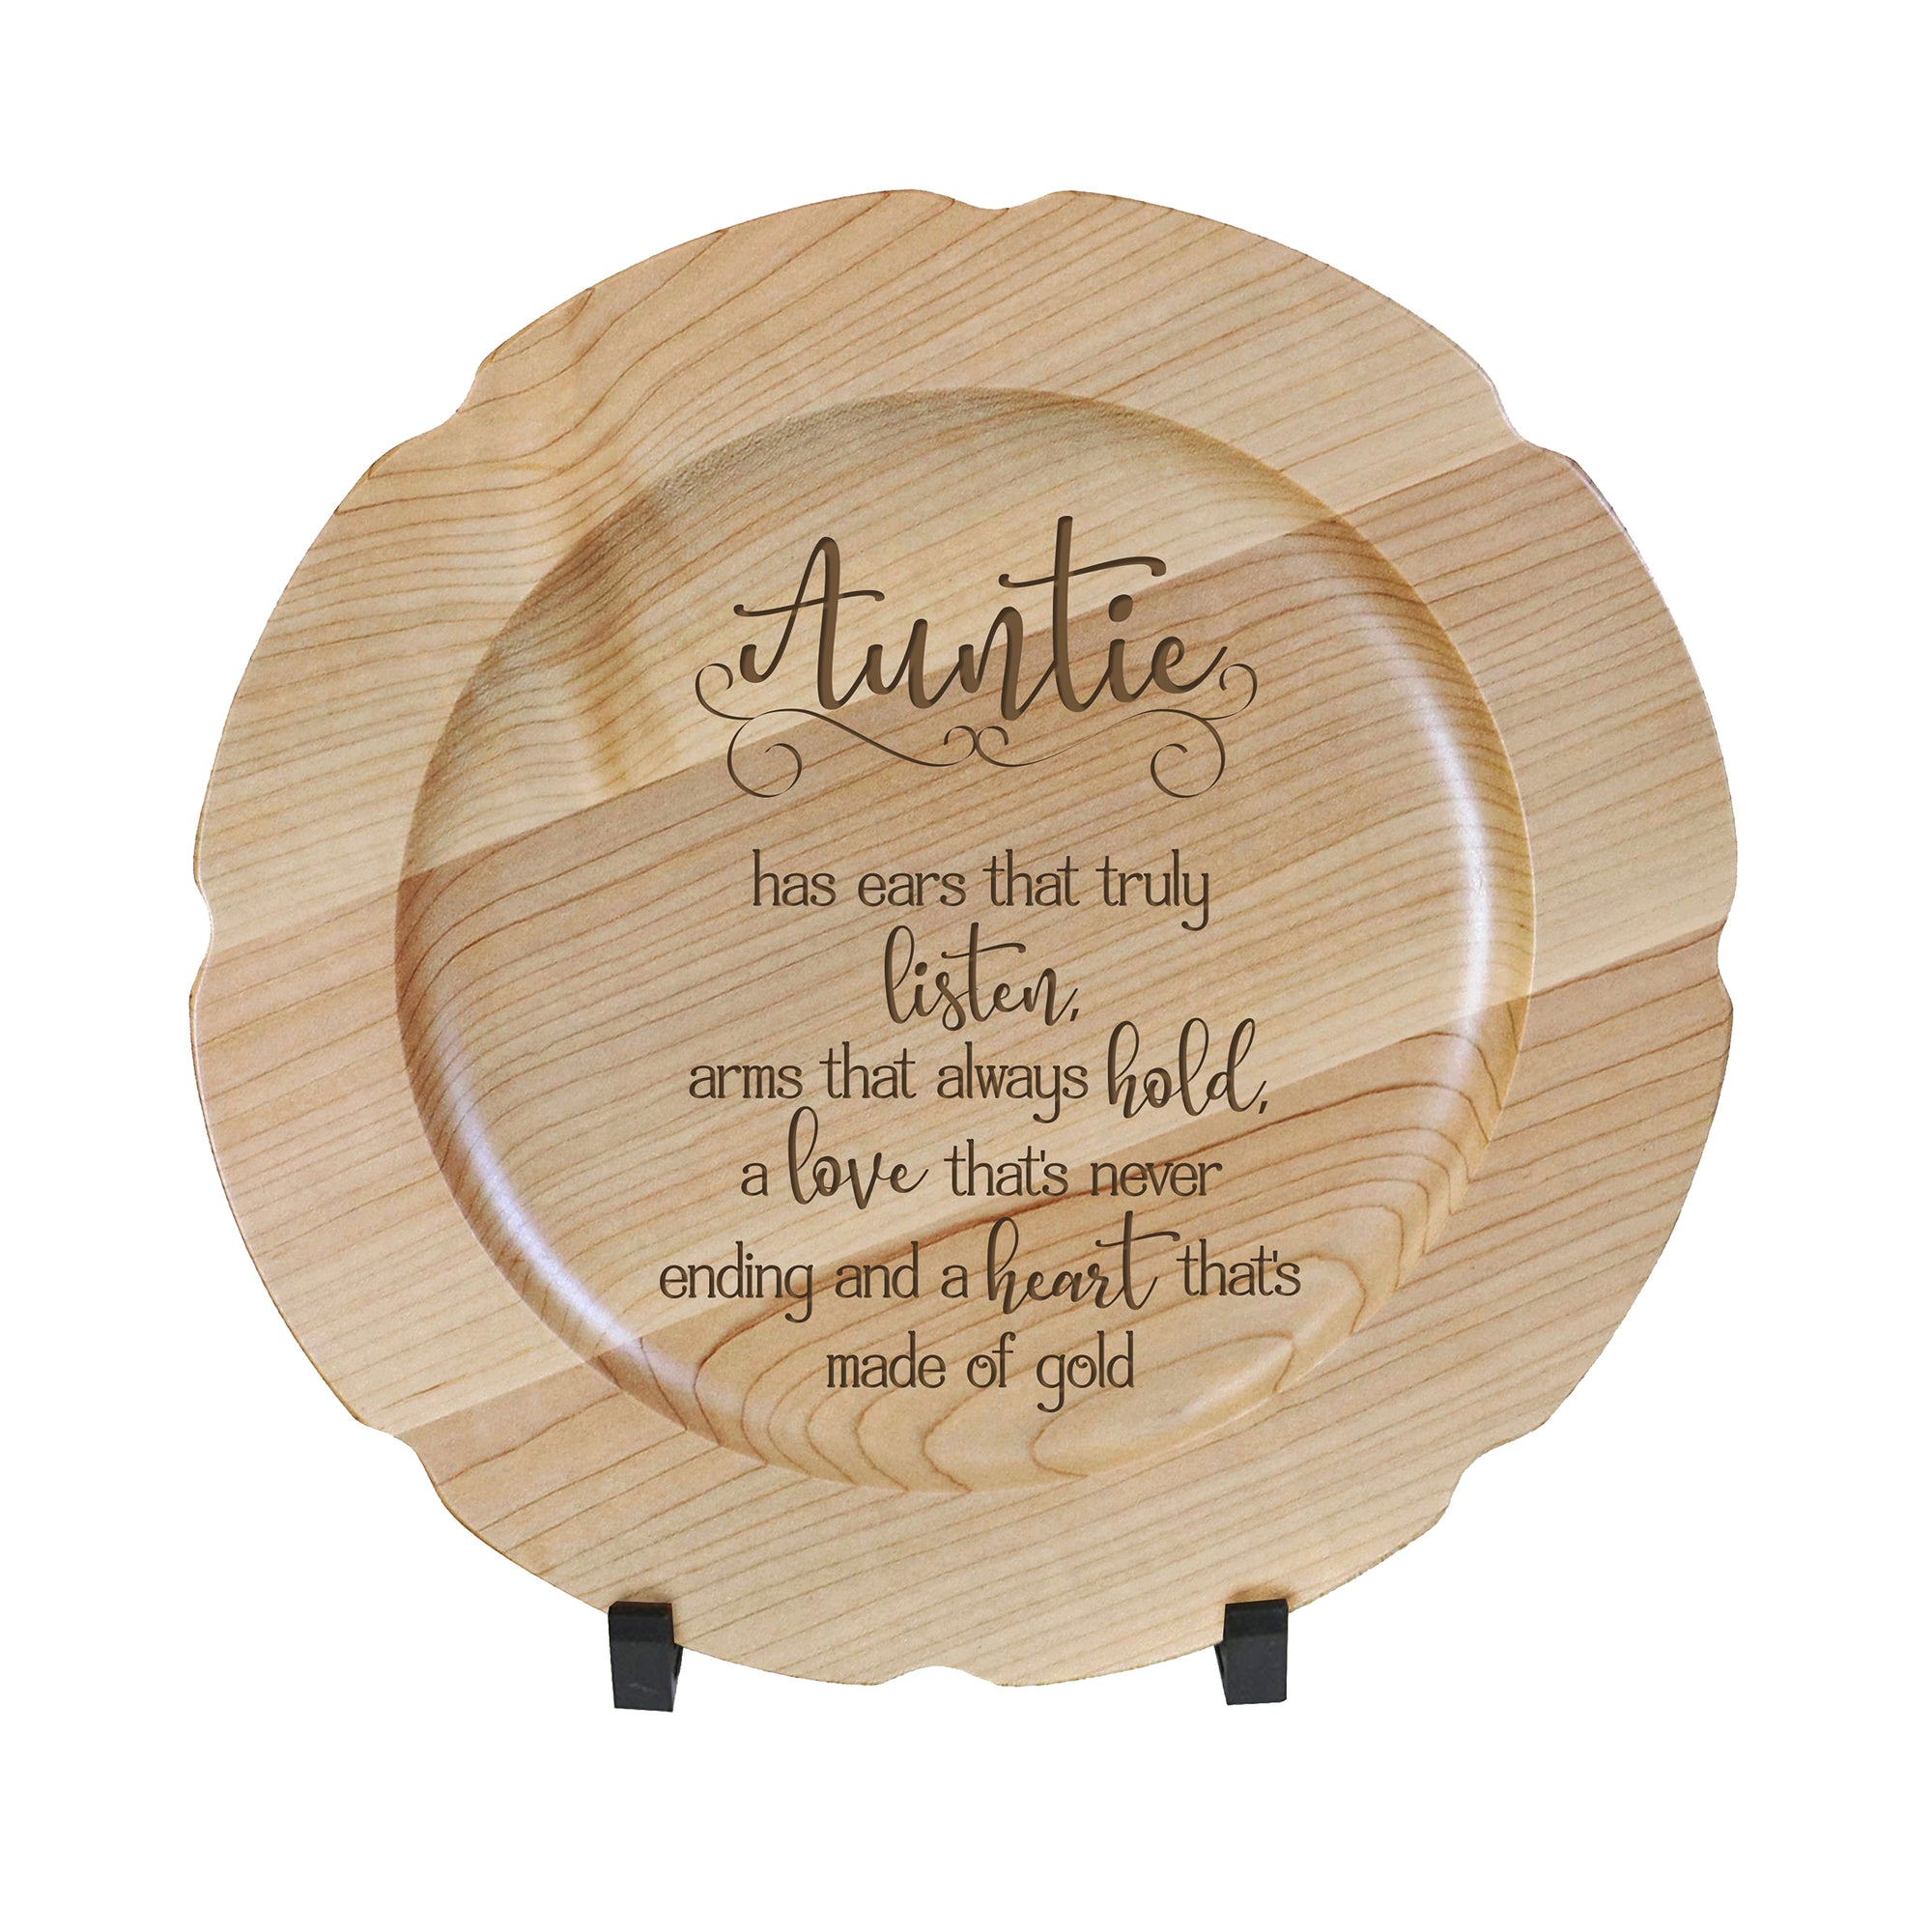 LifeSong Milestones Wooden Decorative Plate Family Keepsake 12in Auntie Housewarming Mother’s Day Gift Home Wall Decor Kitchen Keepsake